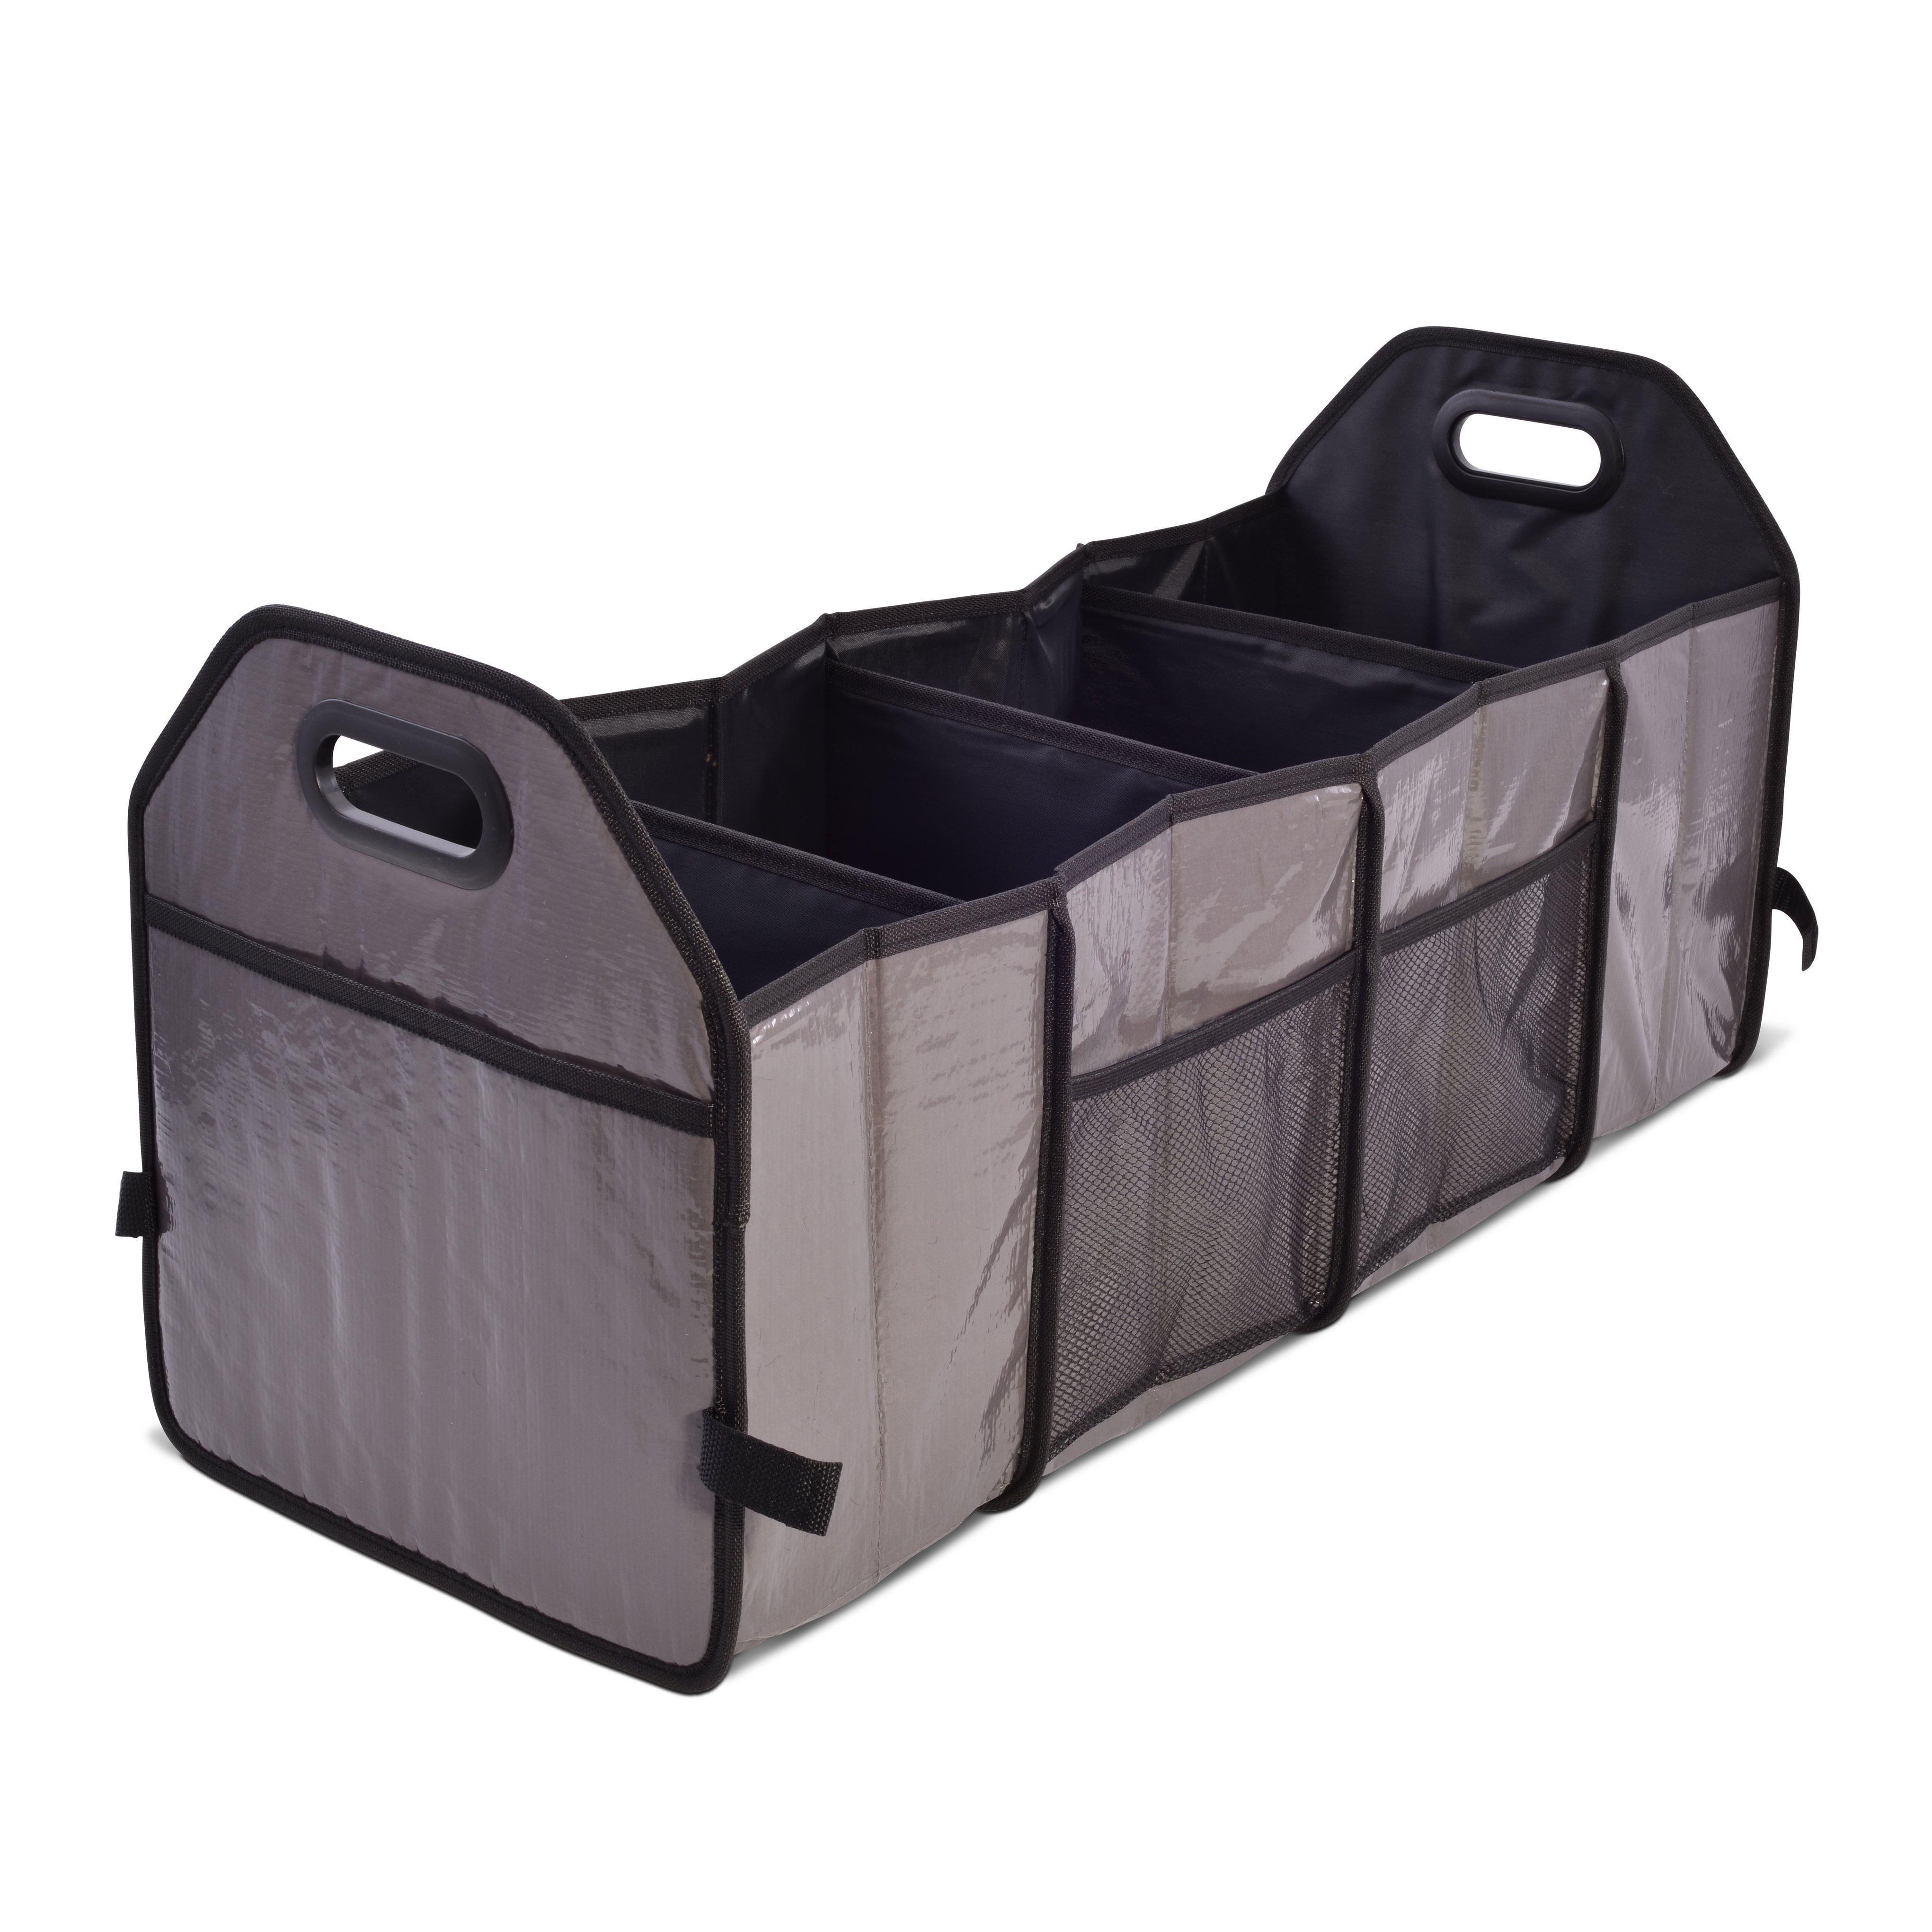 Details about   Trunk Cargo Organizer Folding Caddy Storage Collapse Bag Bin for Car Truck SUV 